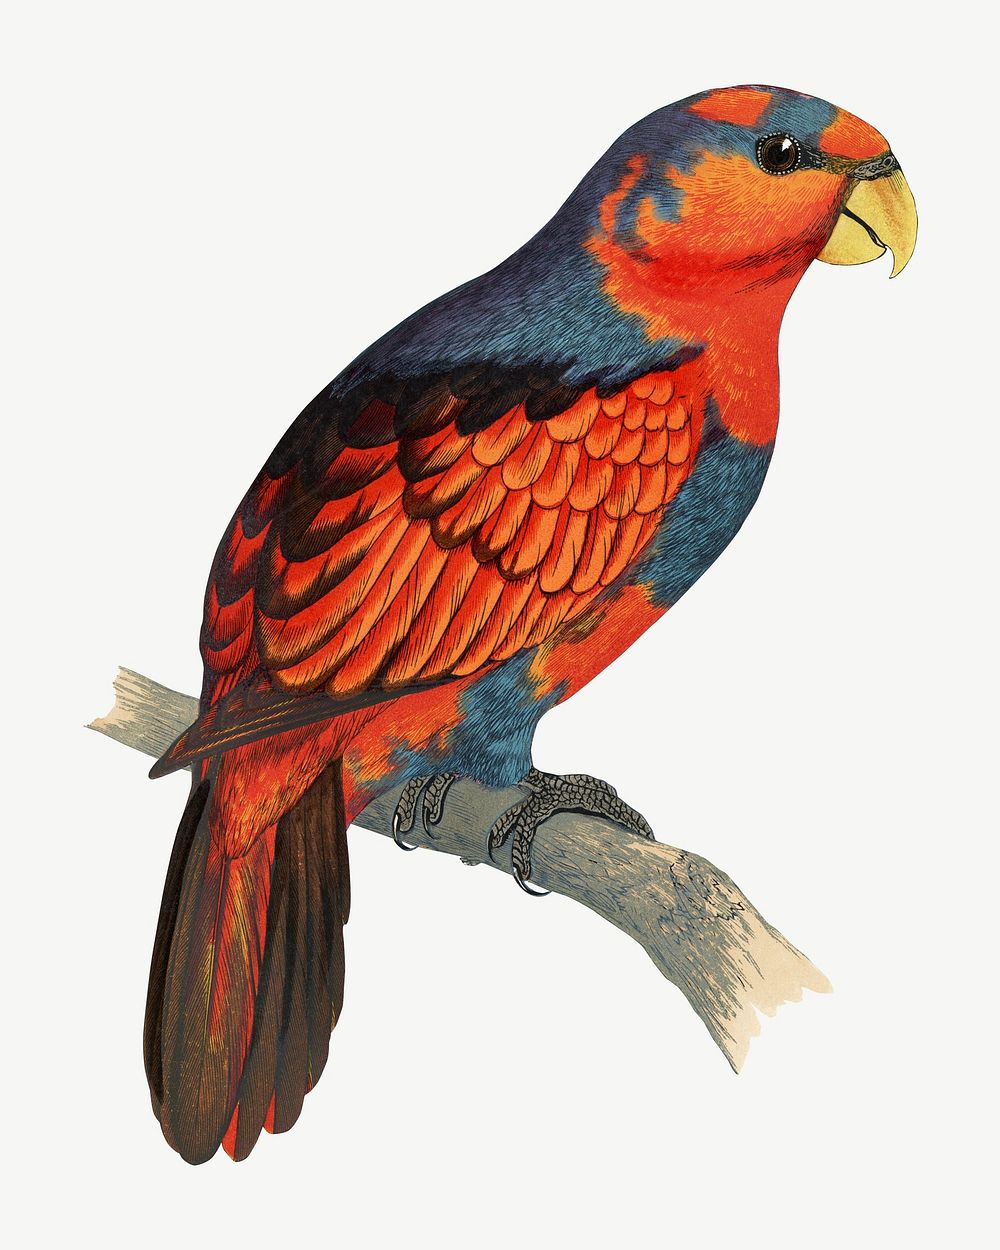 Blue-breasted lory, vintage bird illustration psd. Remixed by rawpixel.